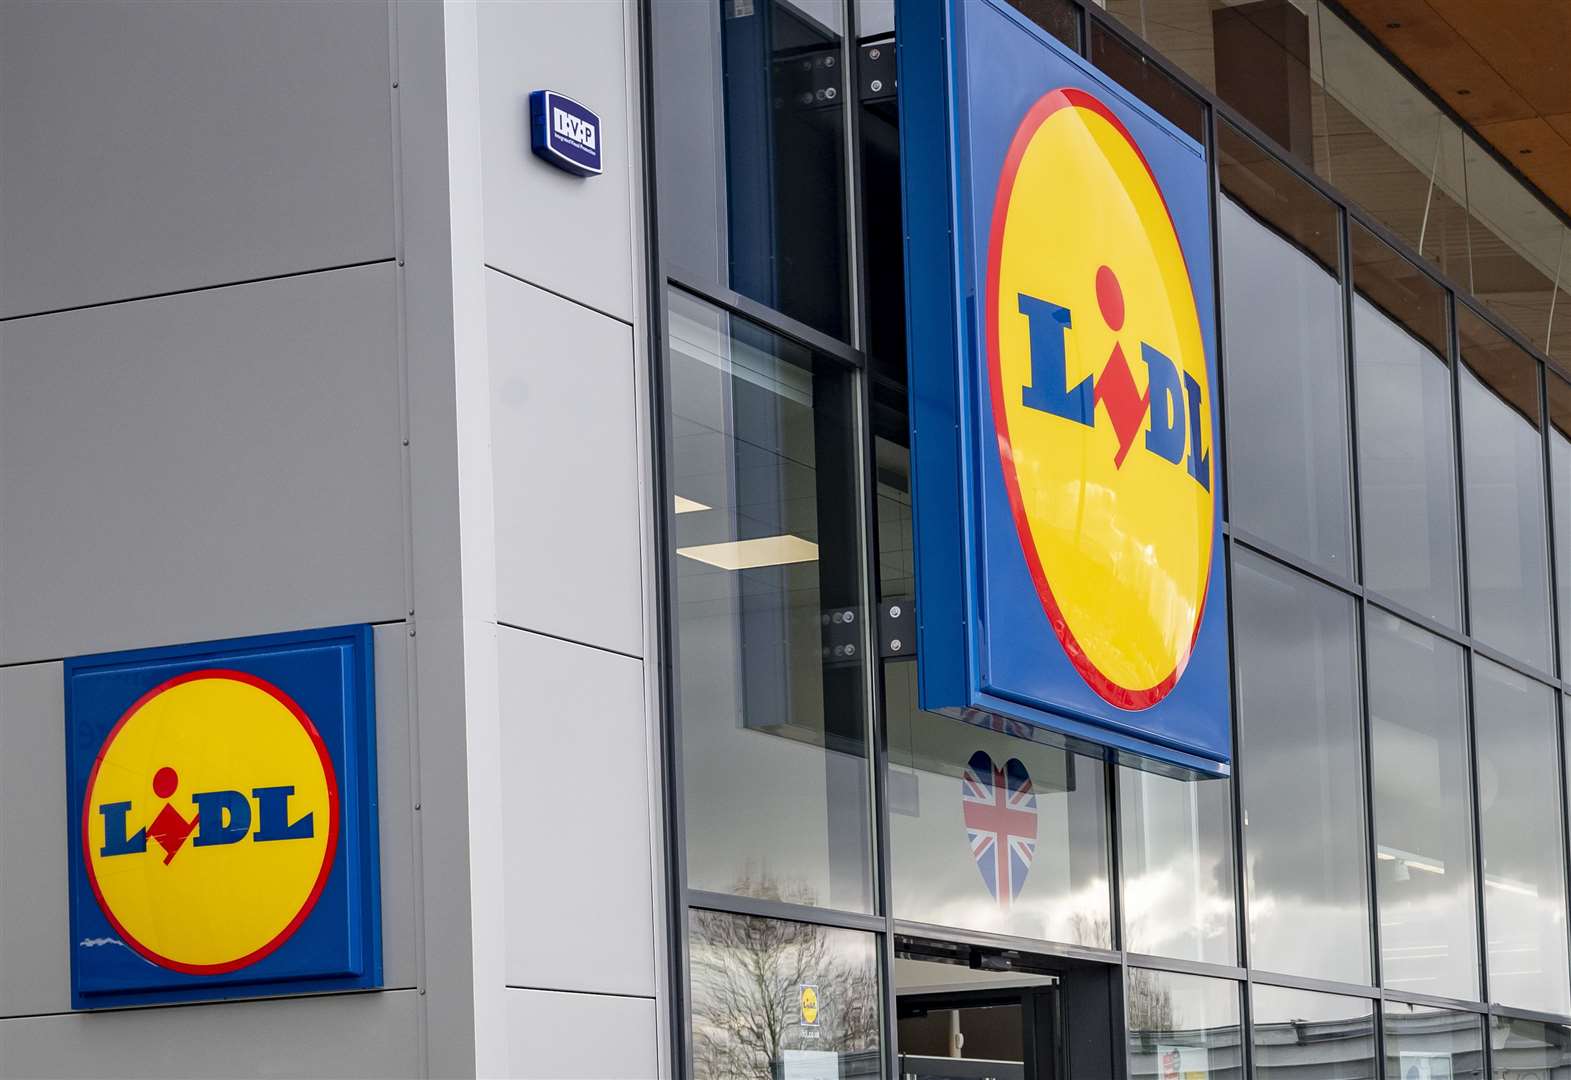 It will be Medway's first Lidl